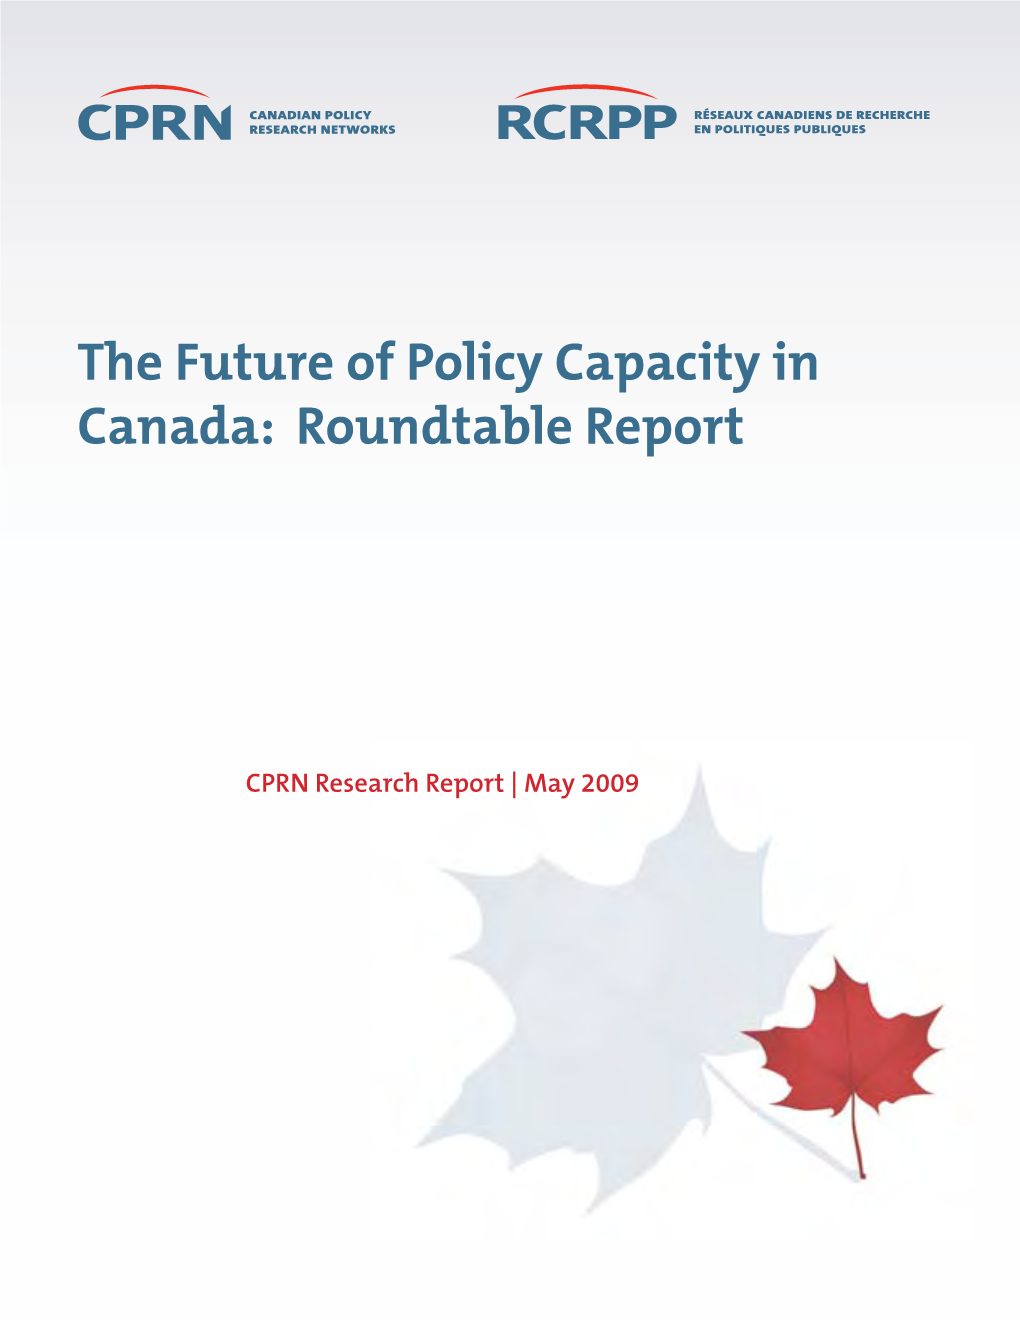 The Future of Policy Capacity in Canada: Roundtable Report